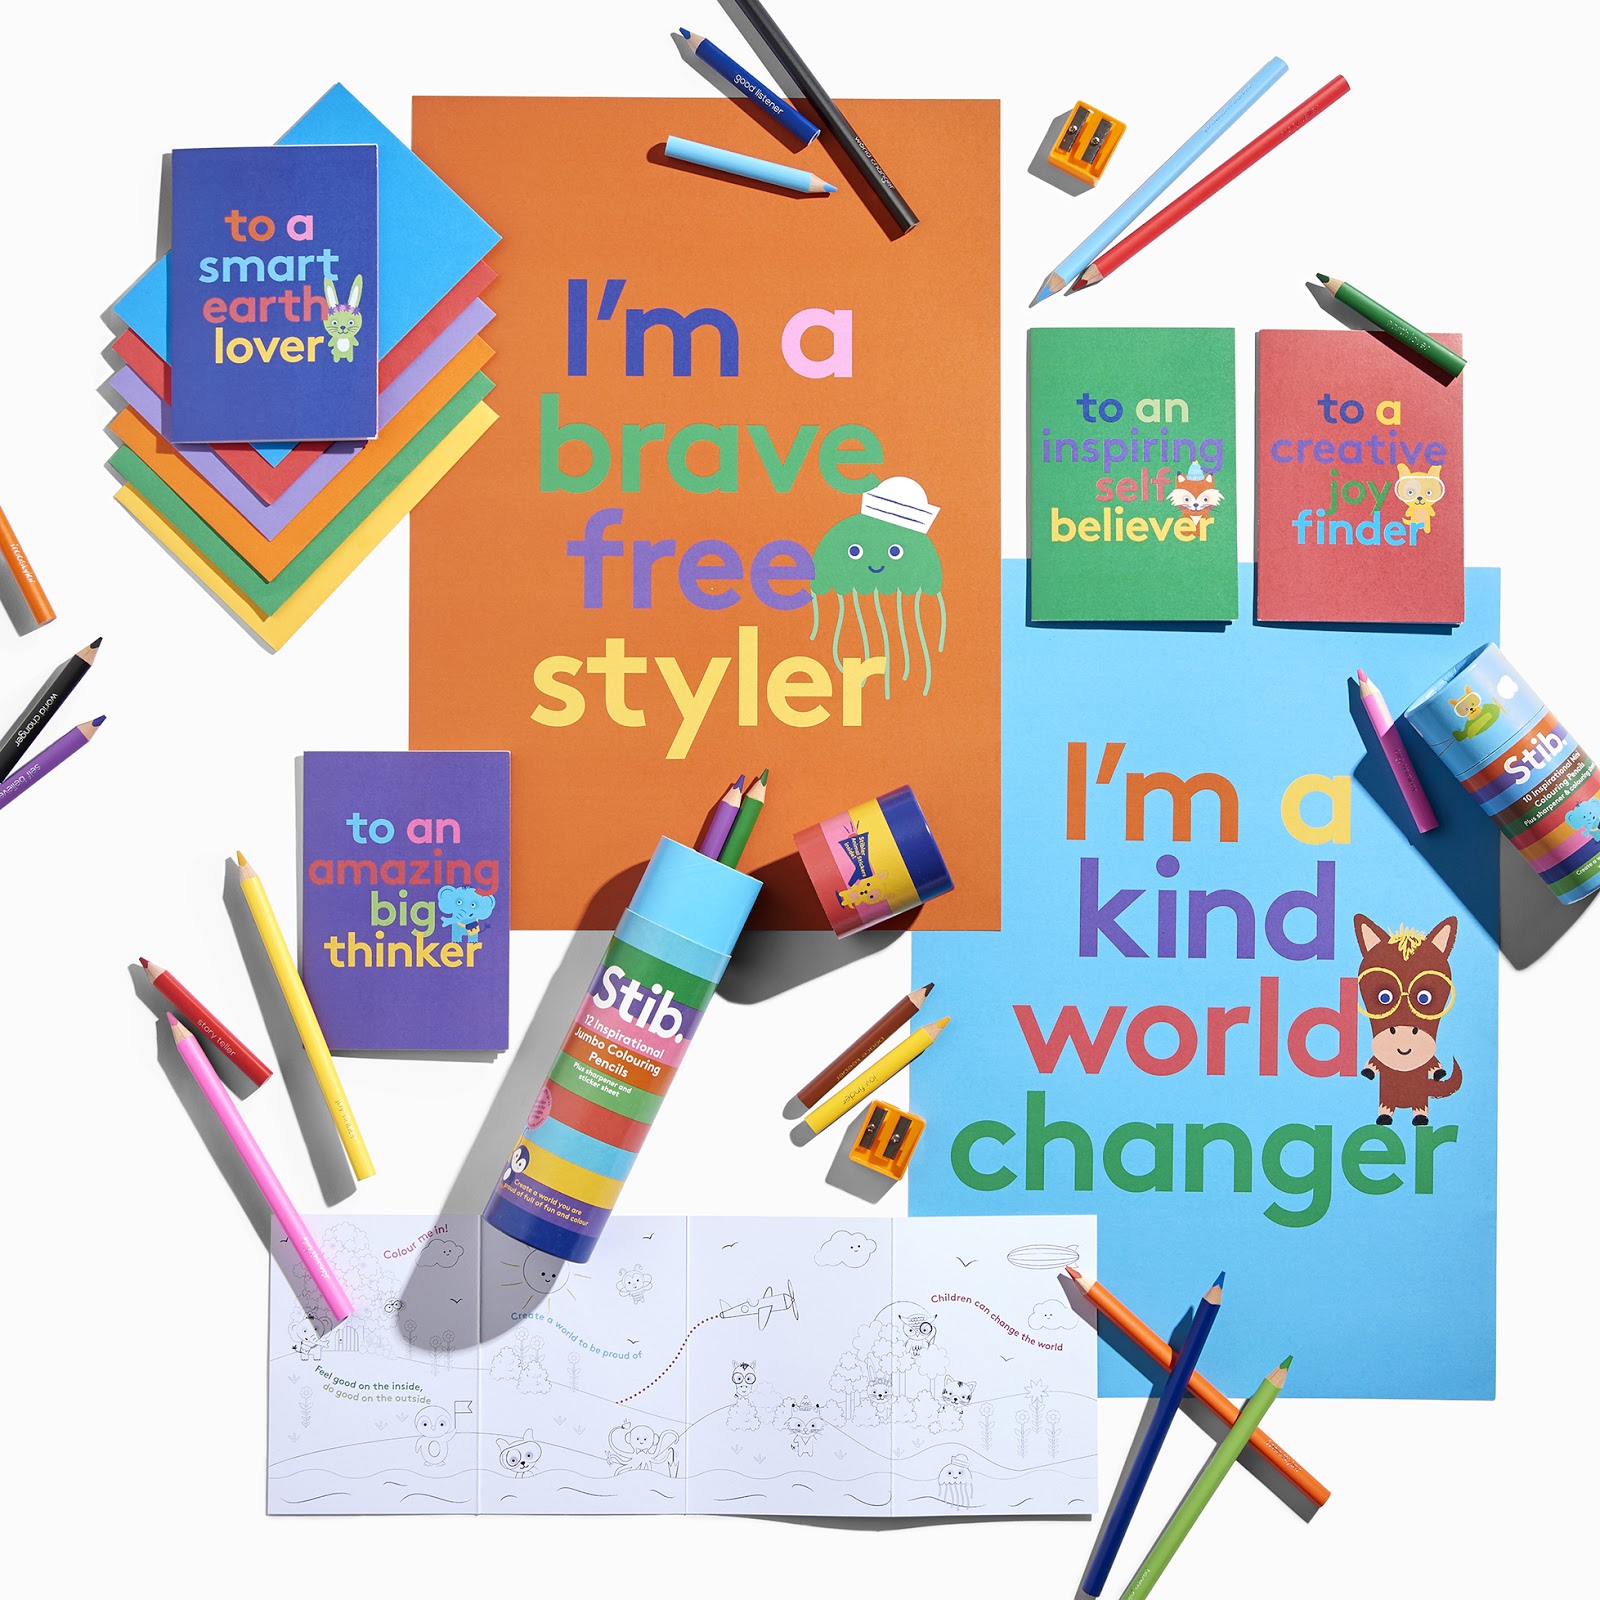 on-selling-inspirational-colouring-pencils